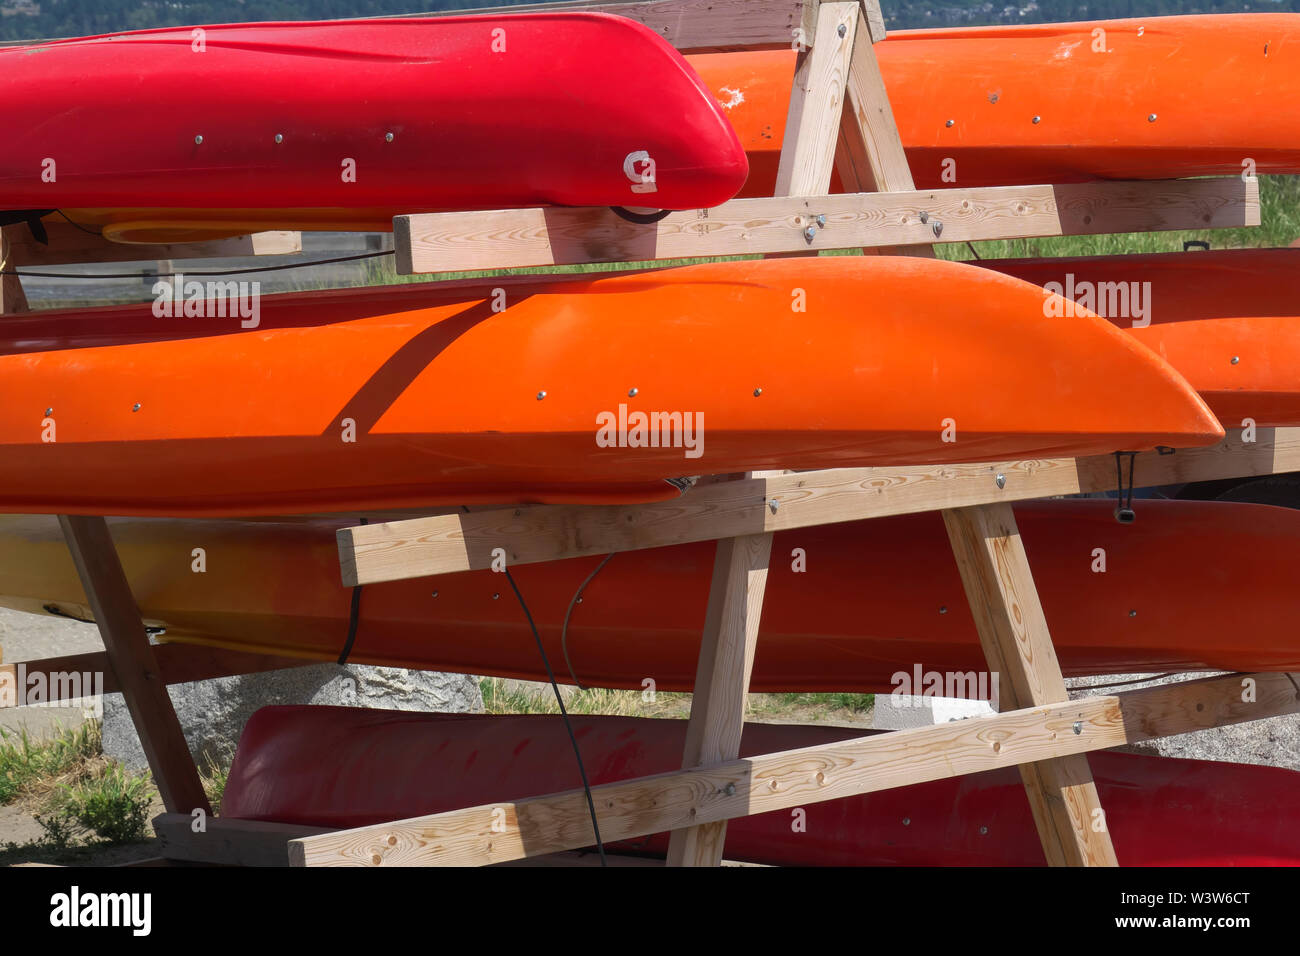 Colourful red and orange kayaks waiting to be rented out. Crescent Beach, B. C., Canada Stock Photo